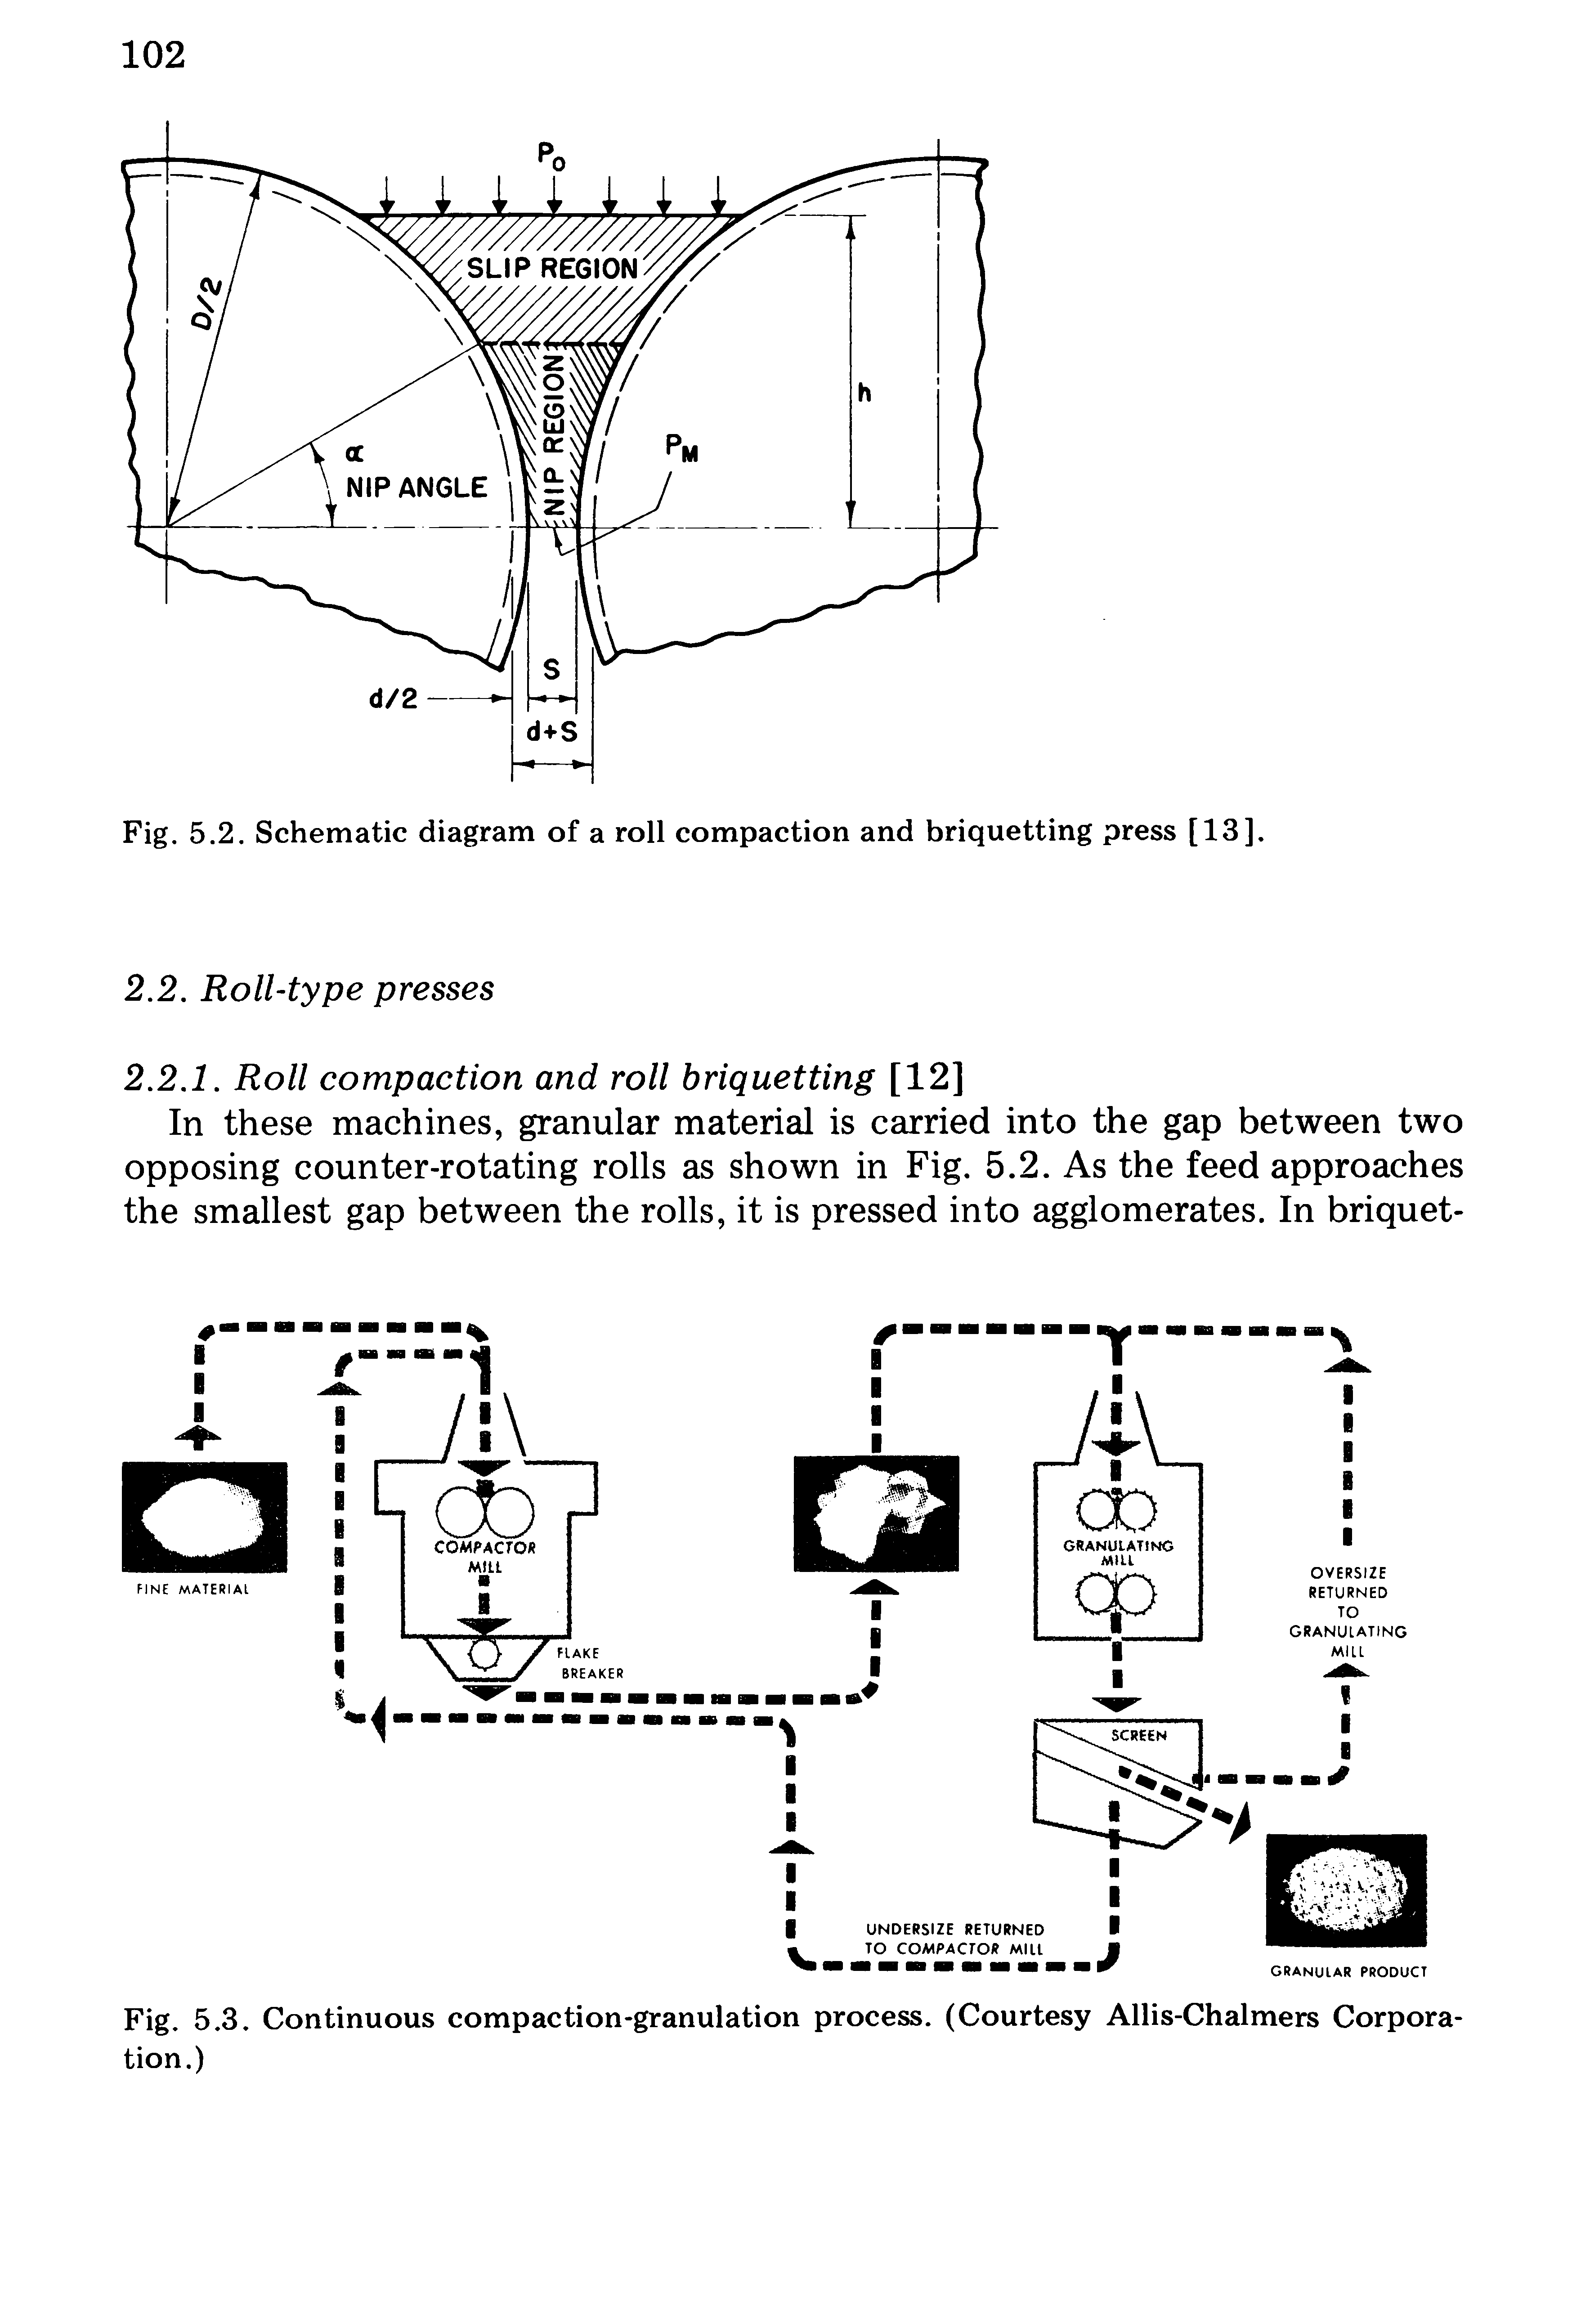 Fig. 5.2. Schematic diagram of a roll compaction and briquetting press [13].